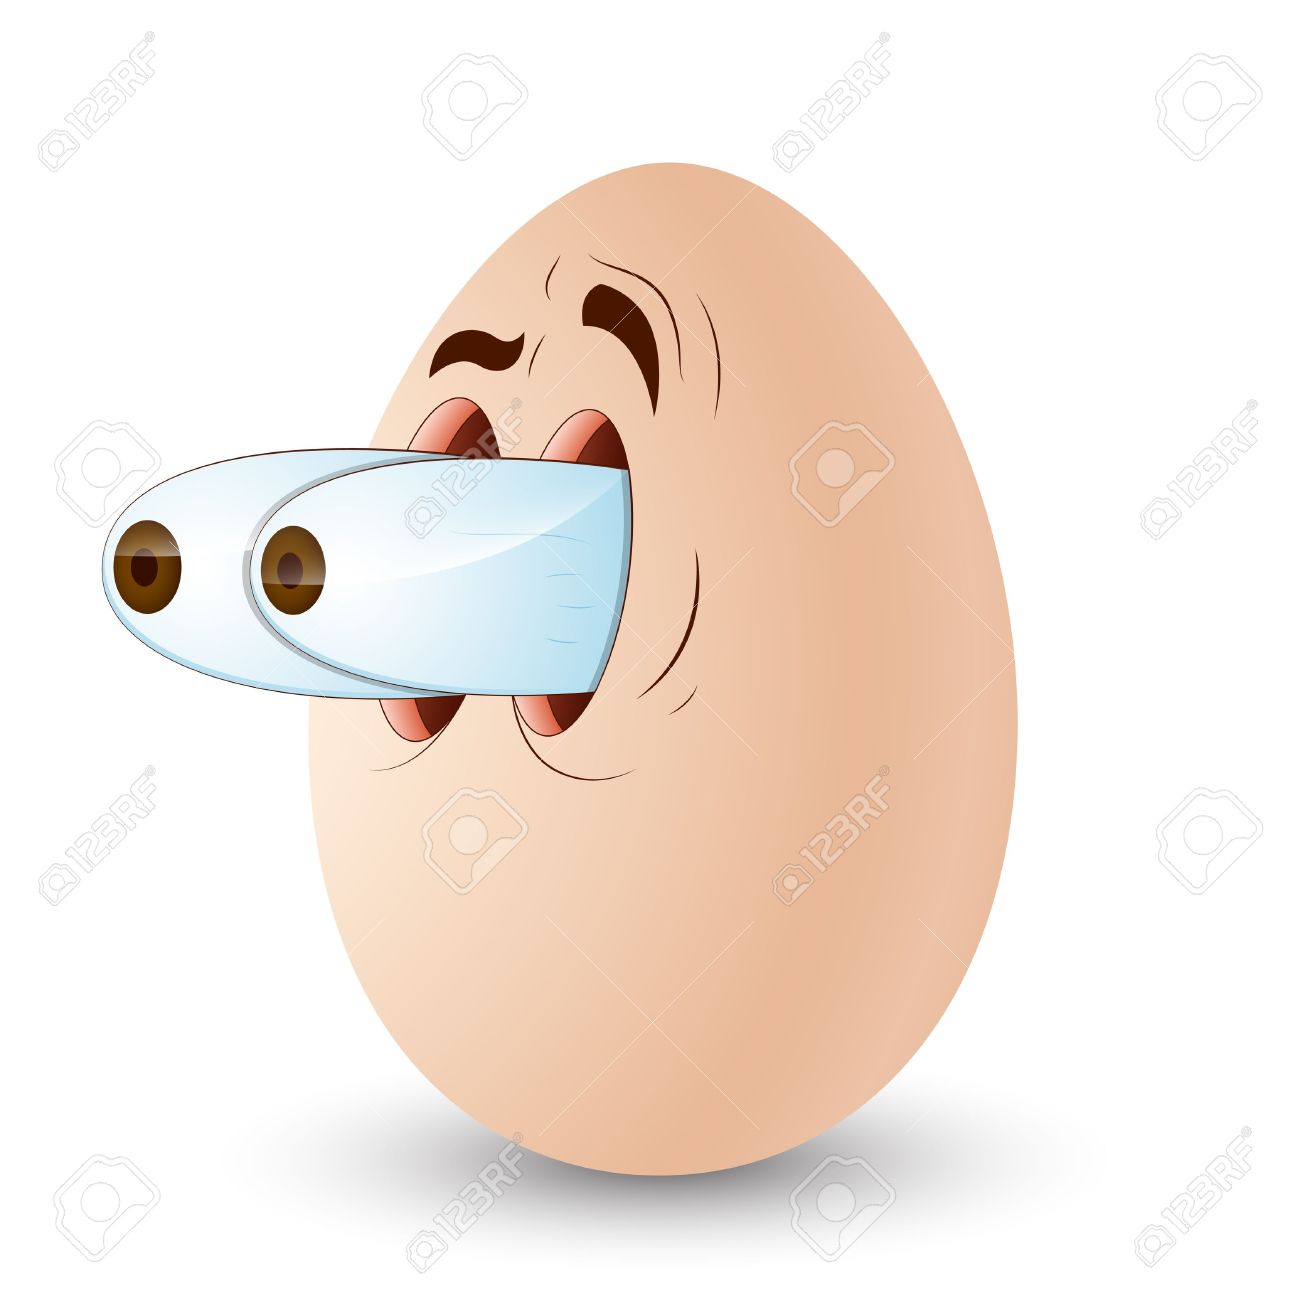 Egg Cartoon With Surprised Eyes Funny Image